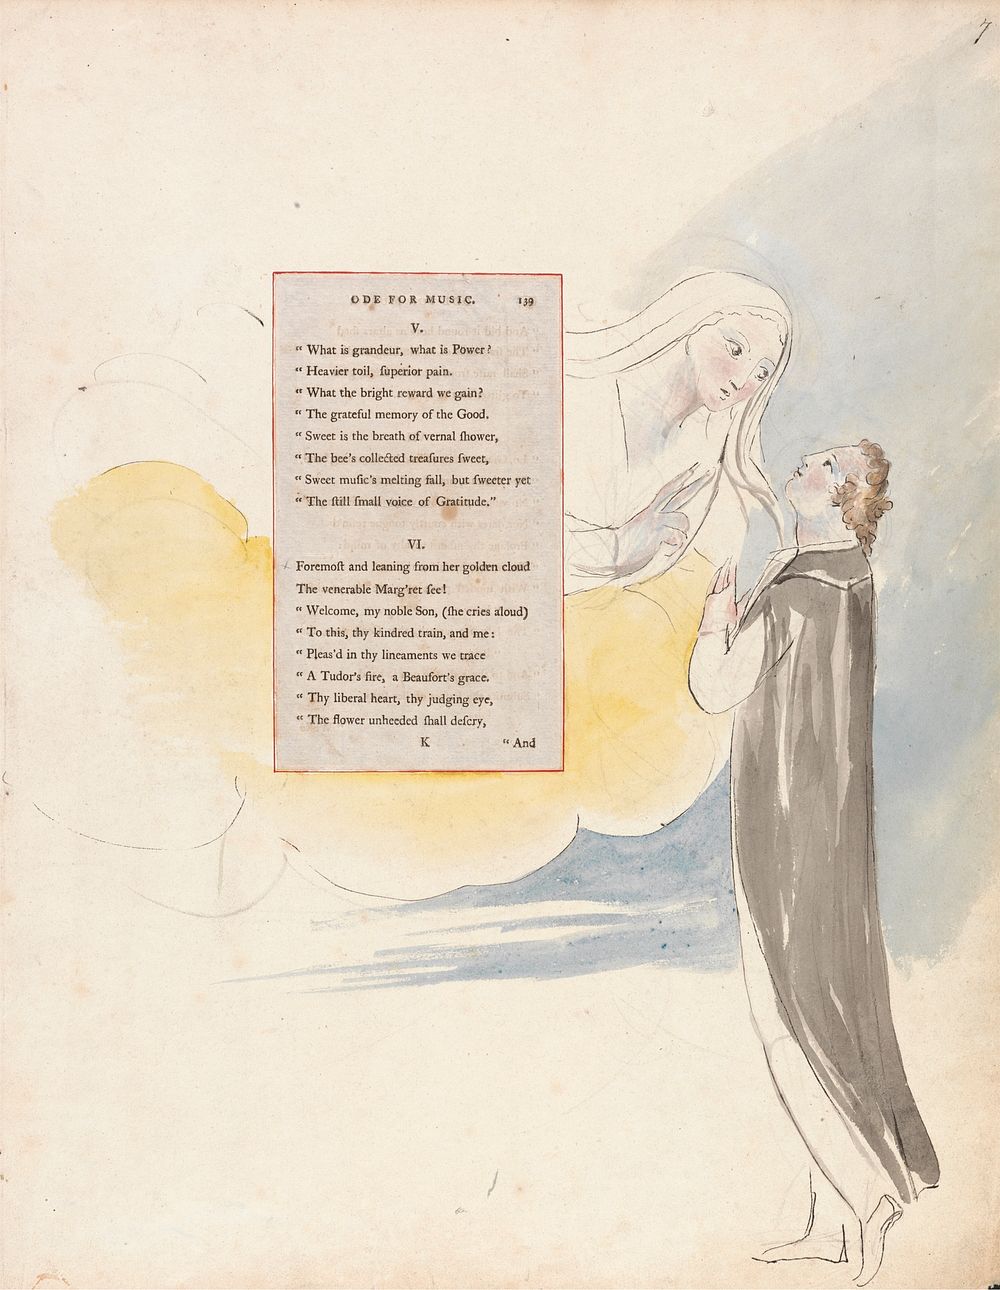 The Poems of Thomas Gray, Design 99, "Ode for Music." by William Blake. Original from Yale Center for British Art.